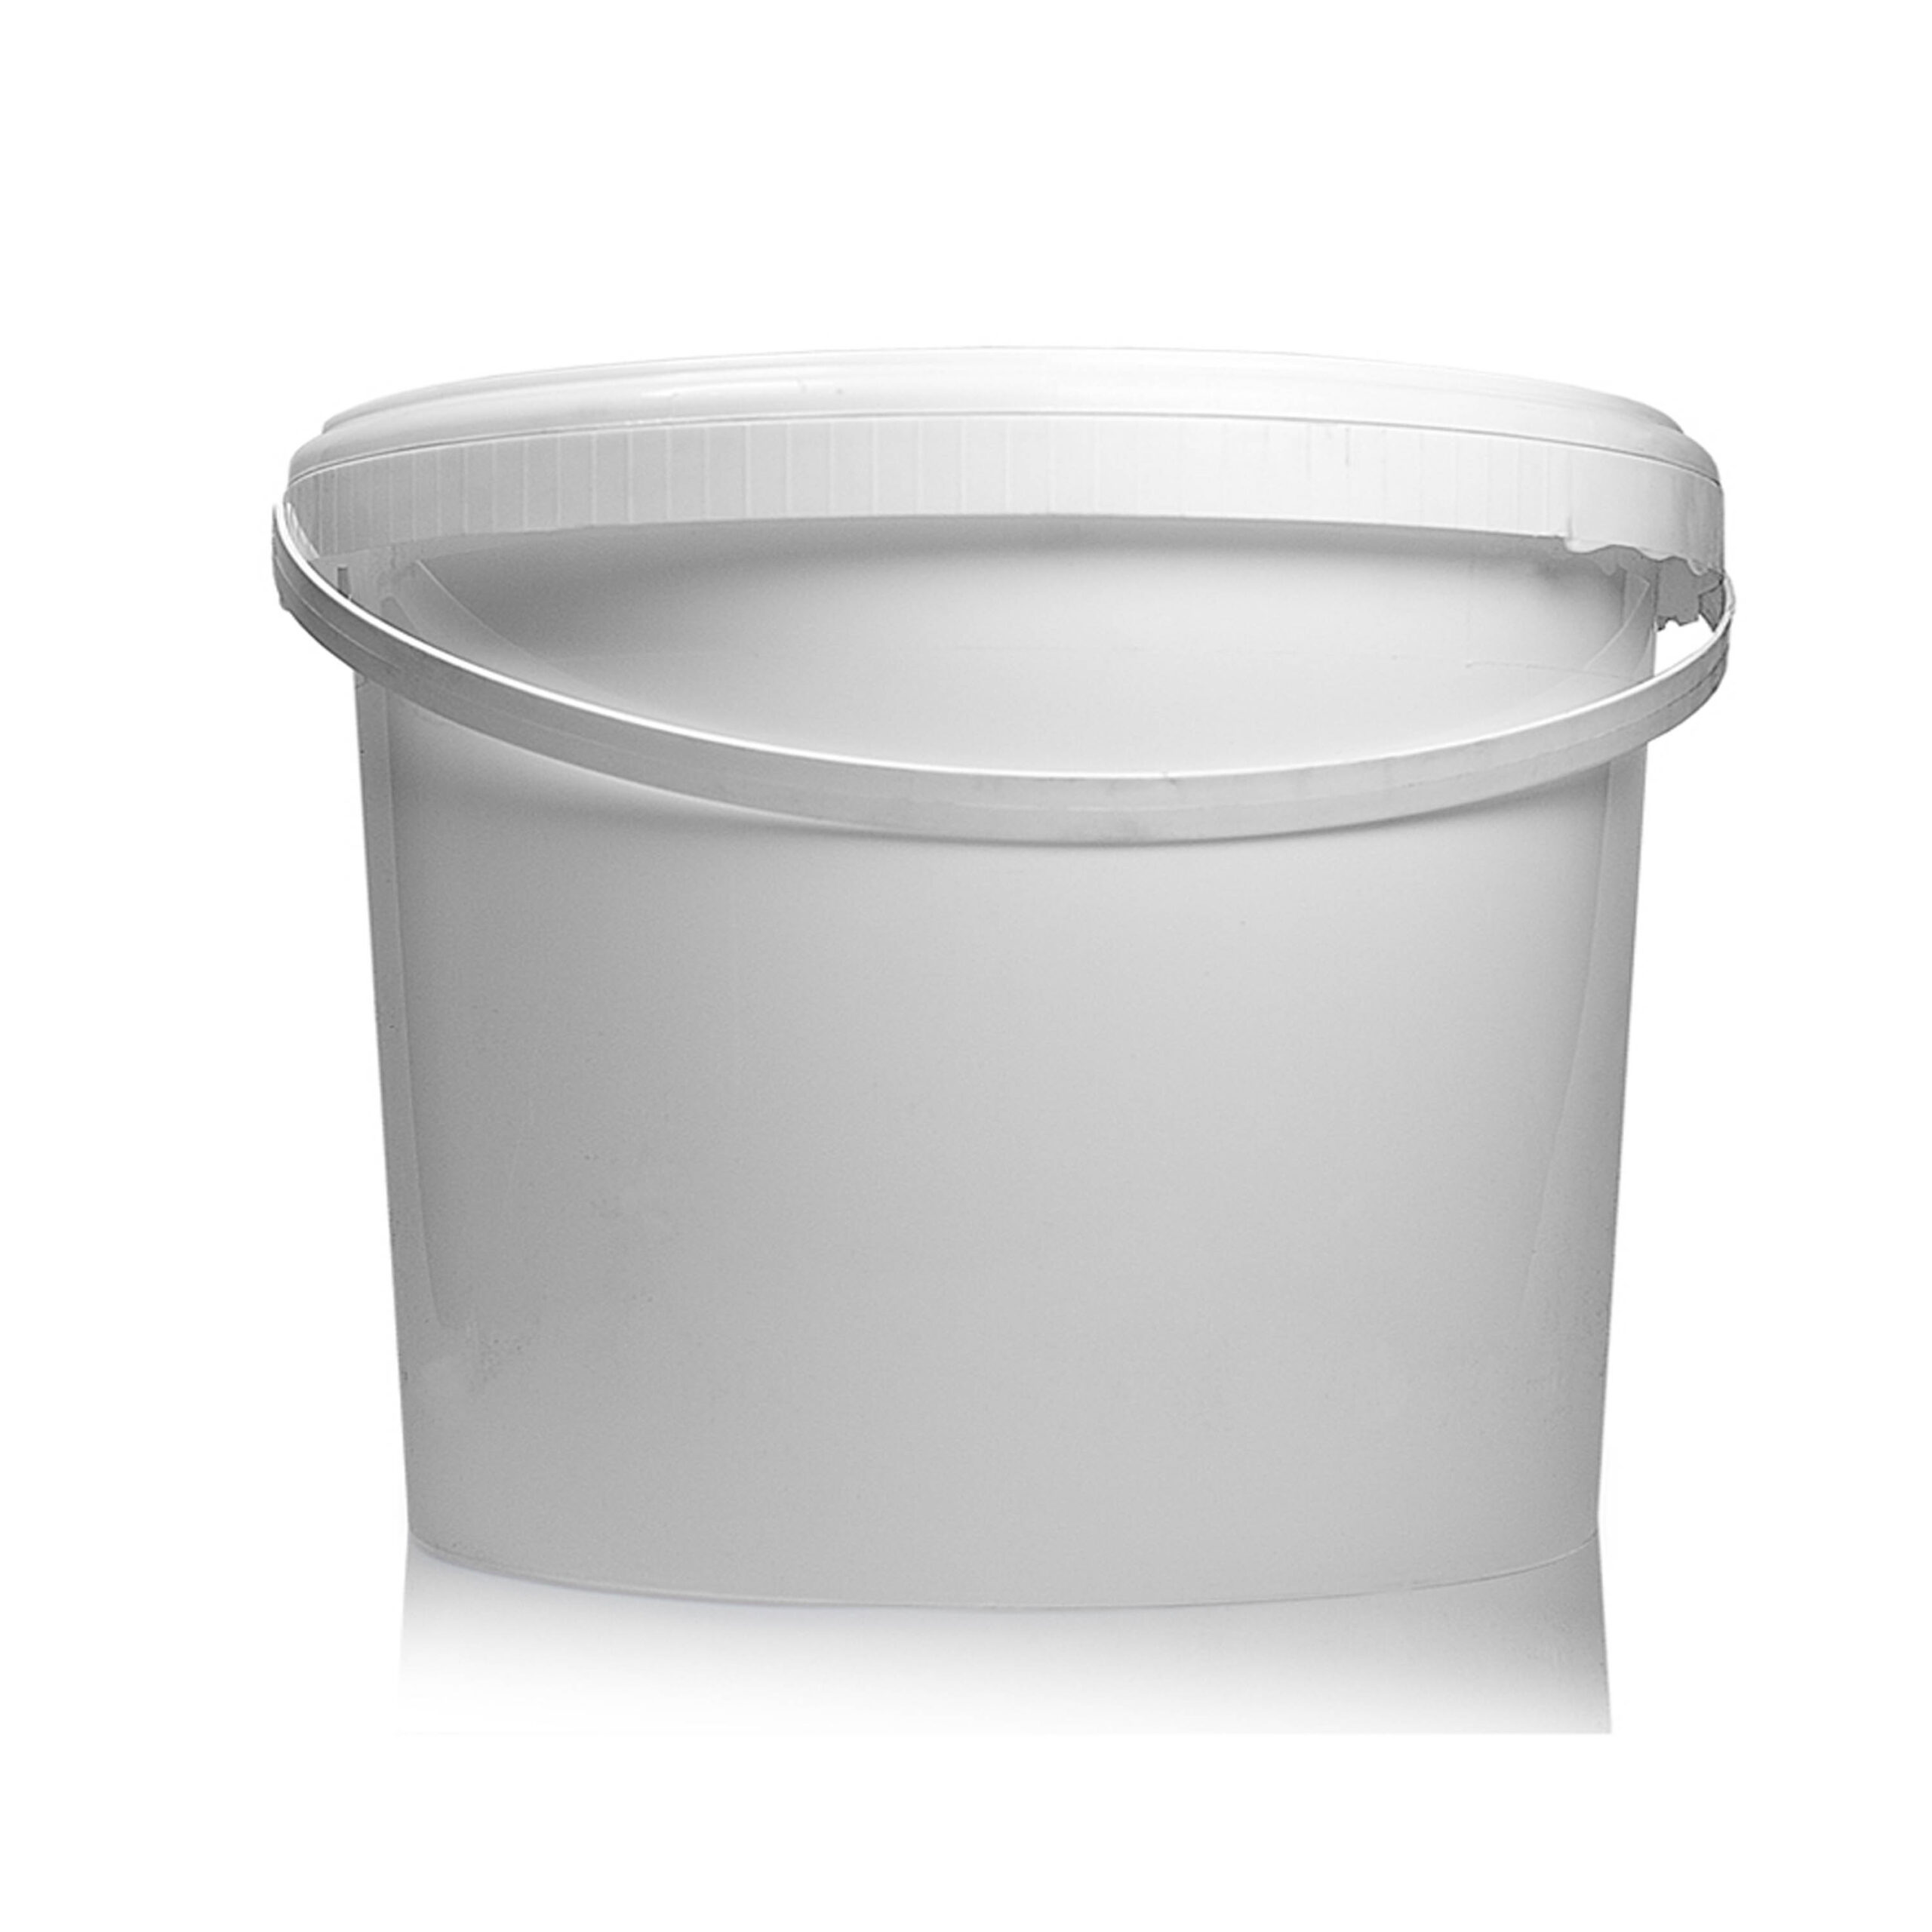 PLASTIC BUCKET
WITH LID WHITE
5Lt (1x5)